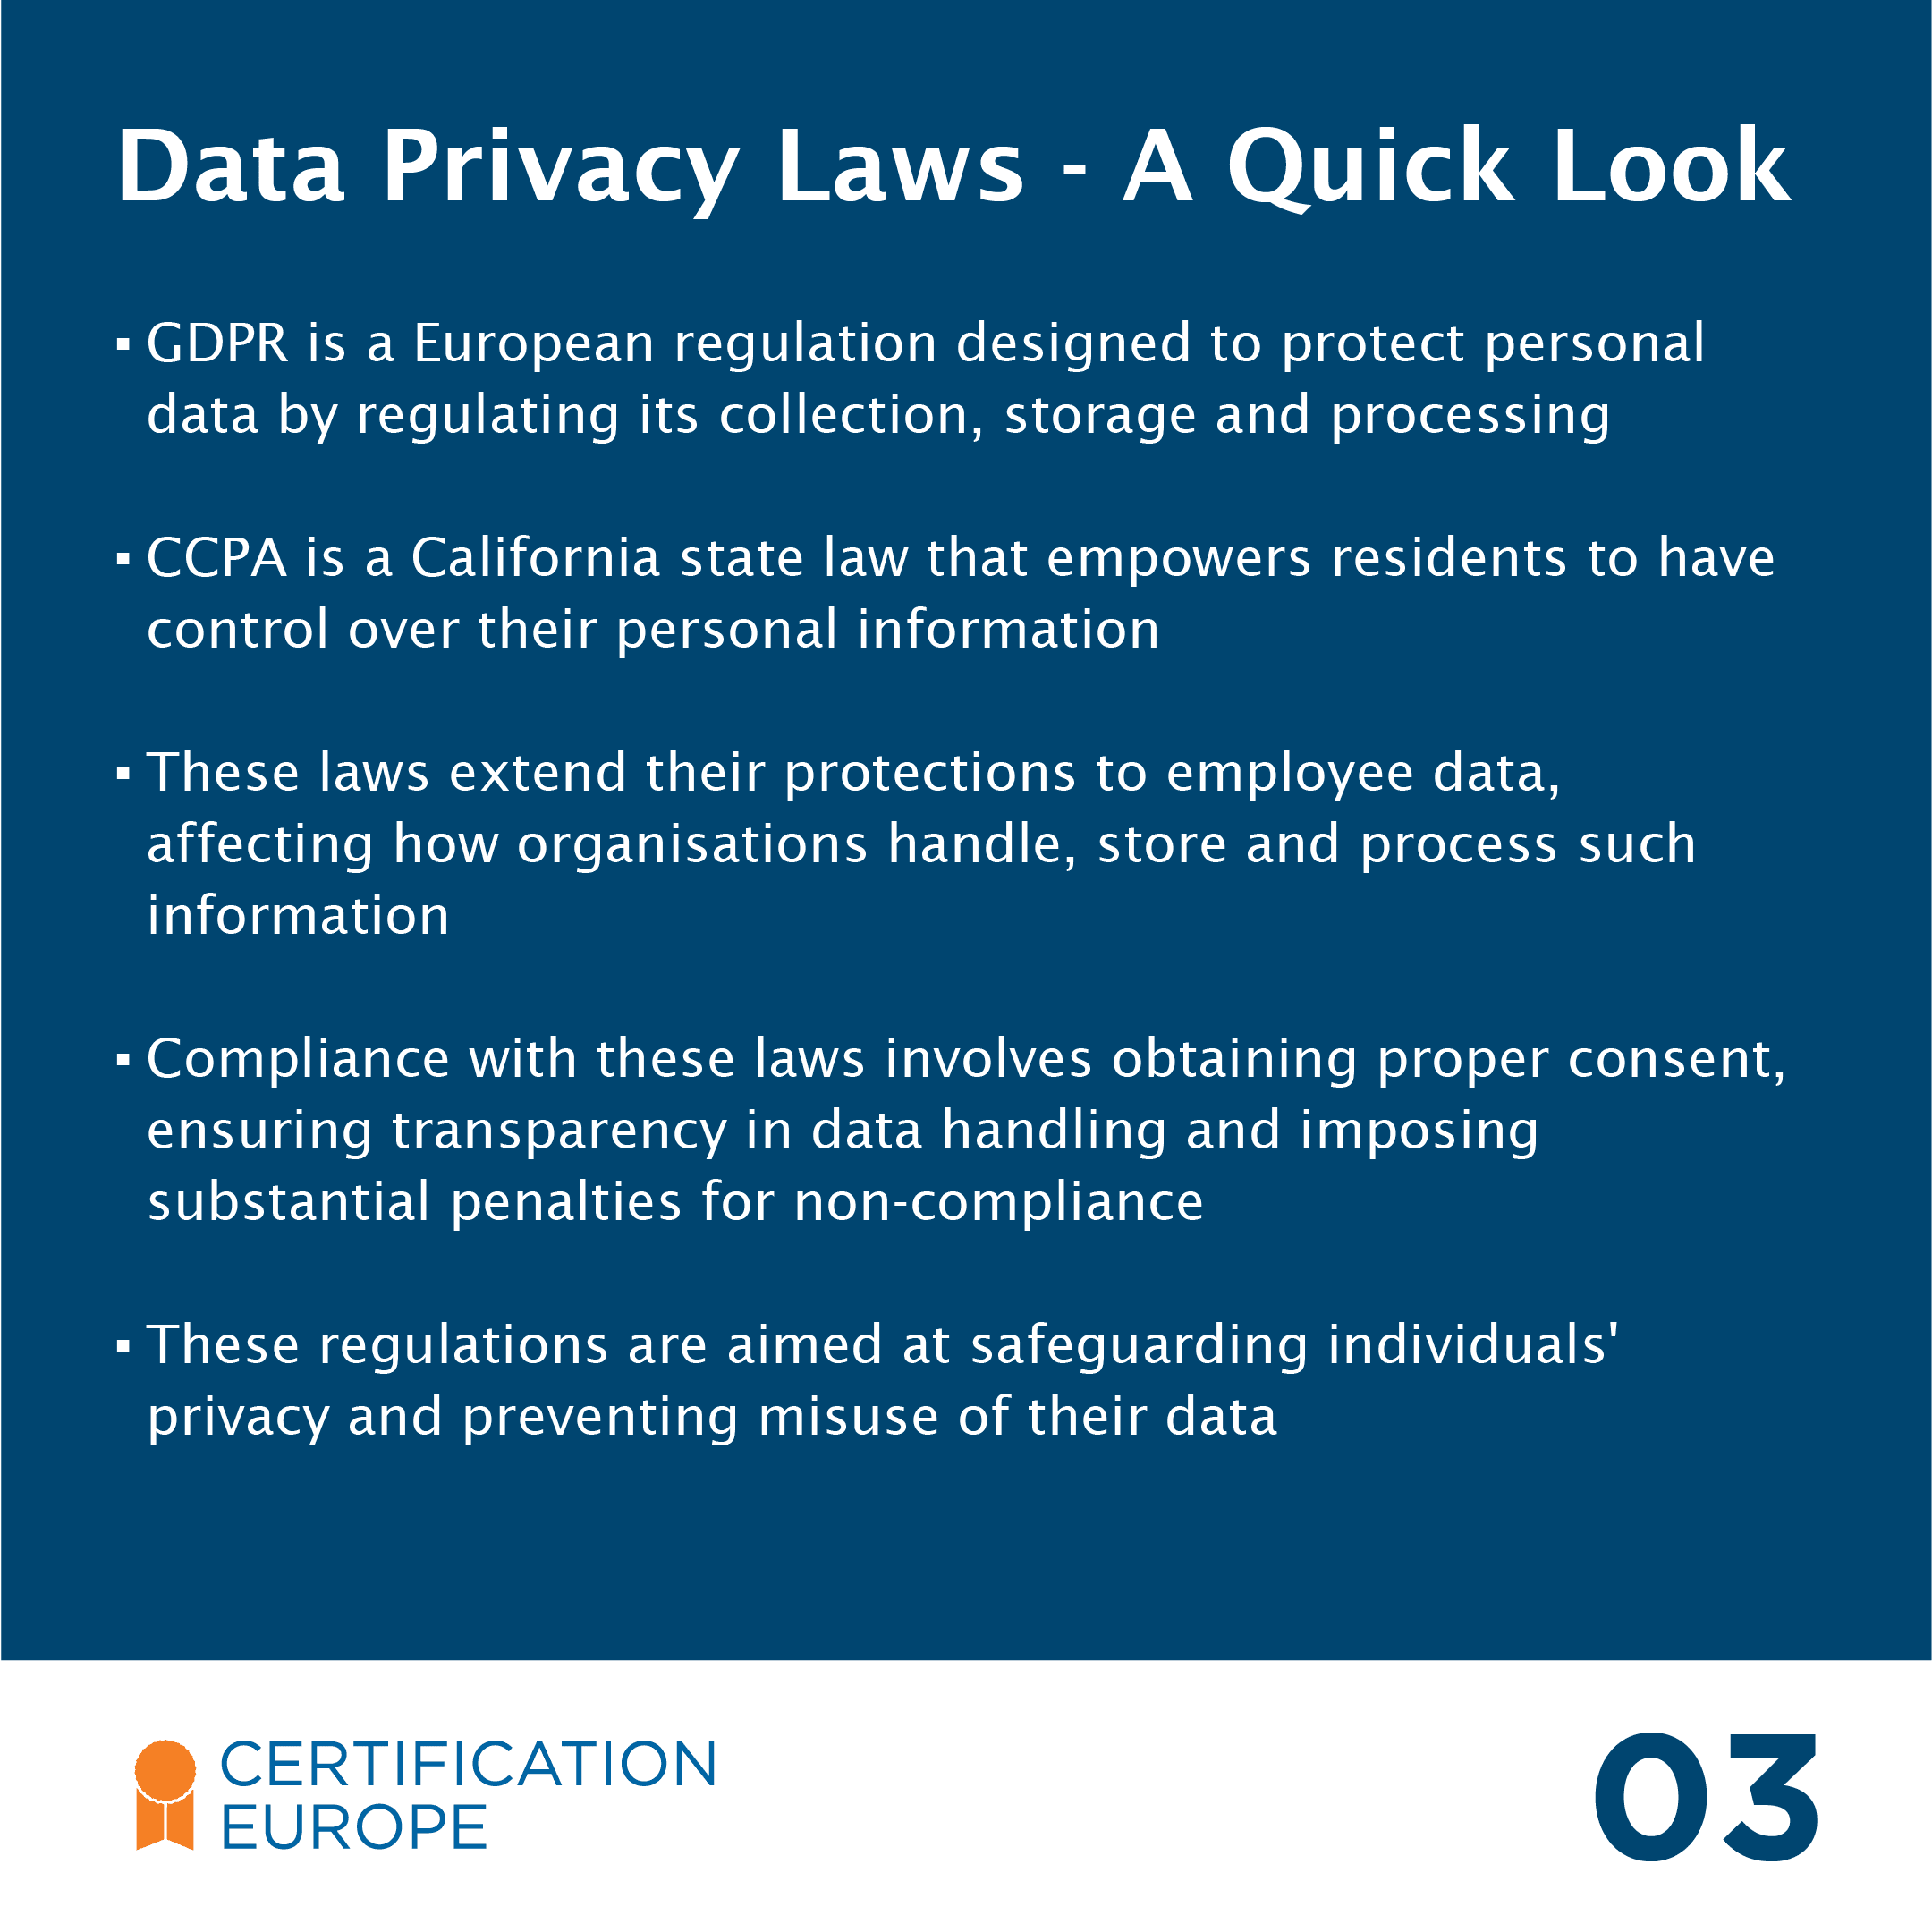 Data privacy laws